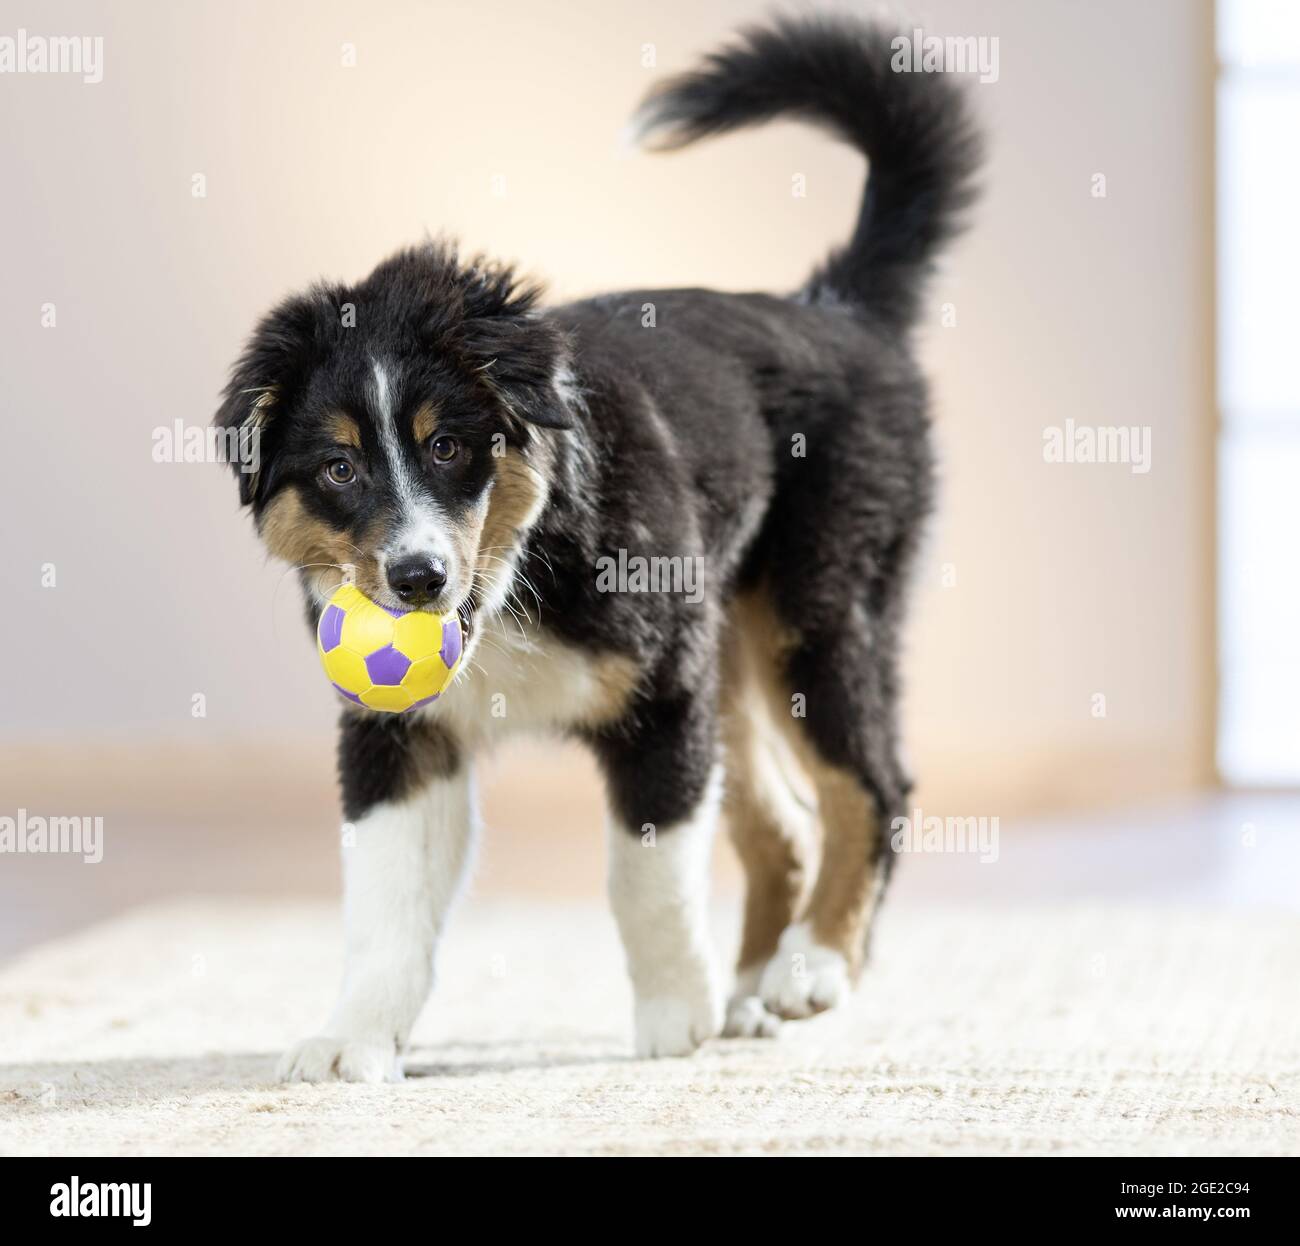 Australian Shepherd. Puppy playing with a ball. Germany Stock Photo